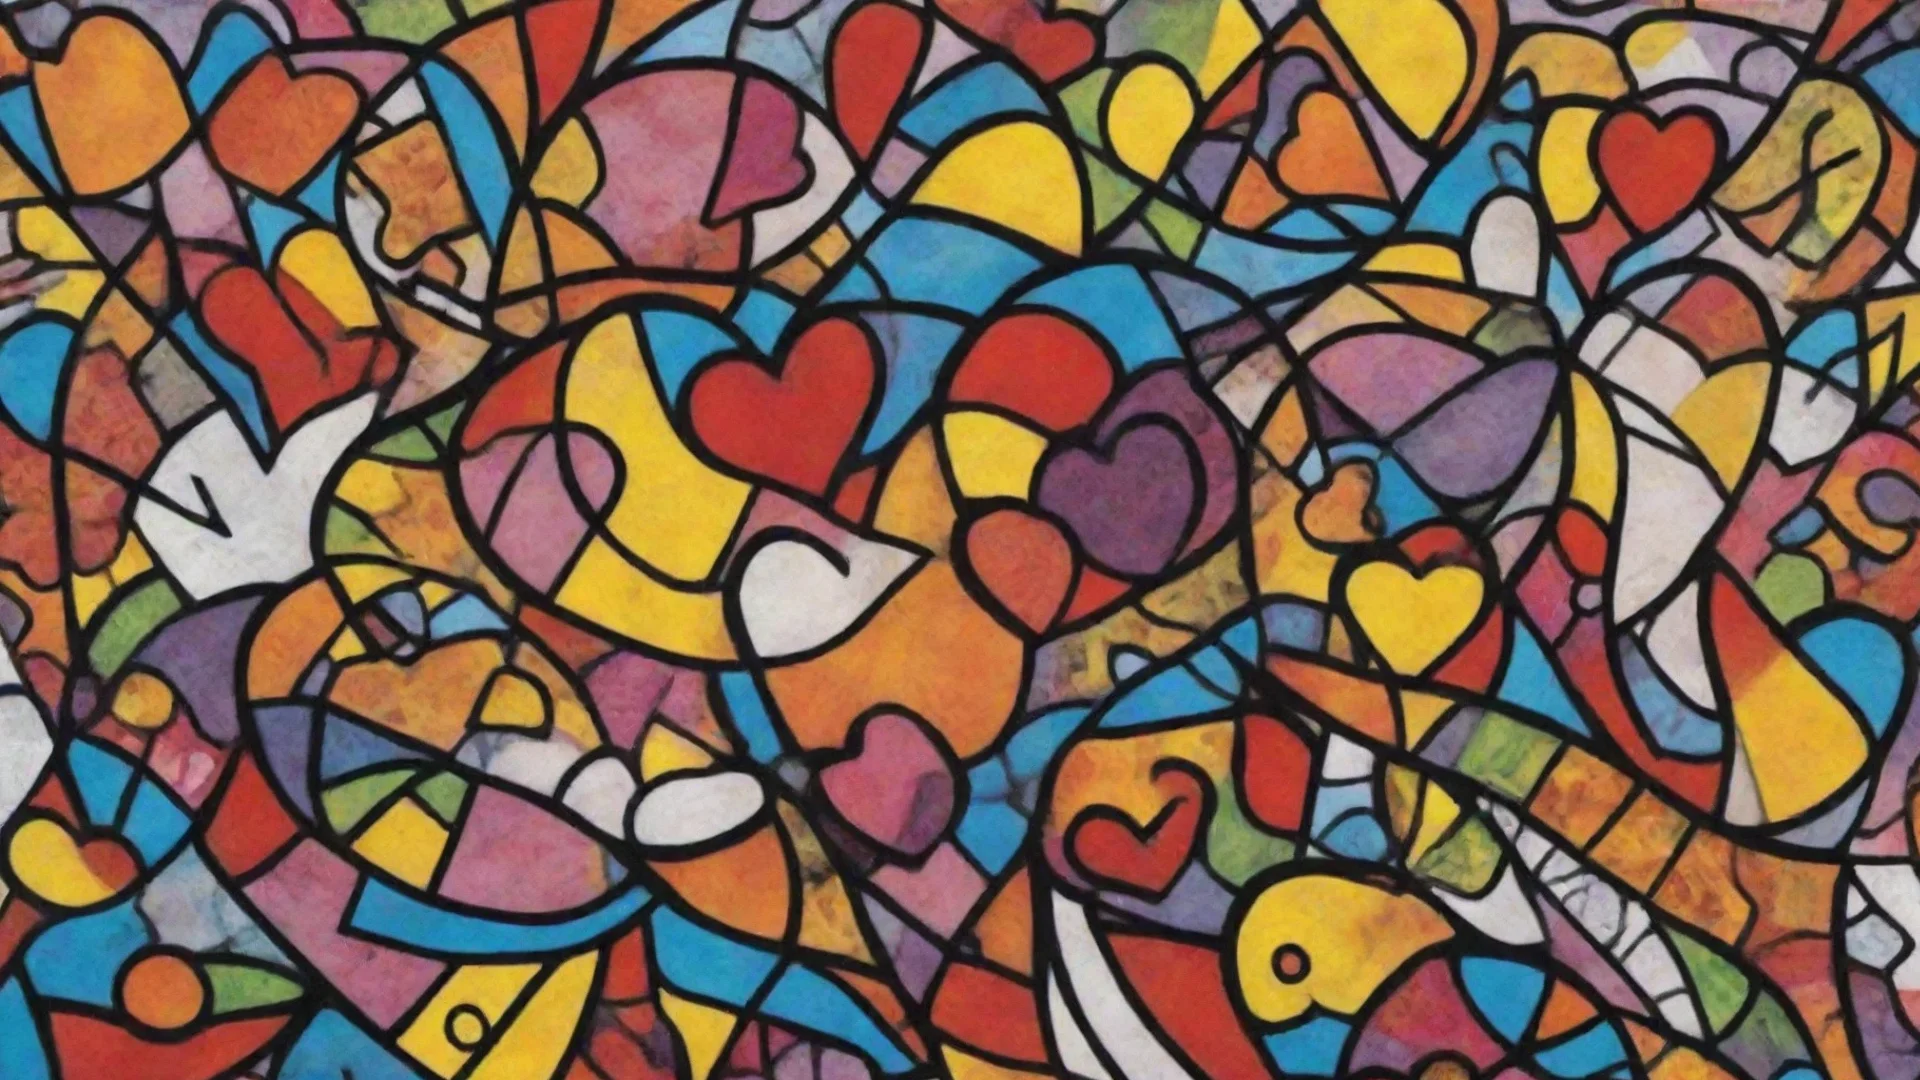 aiartstation art romero britto confident engaging wow 3 wide